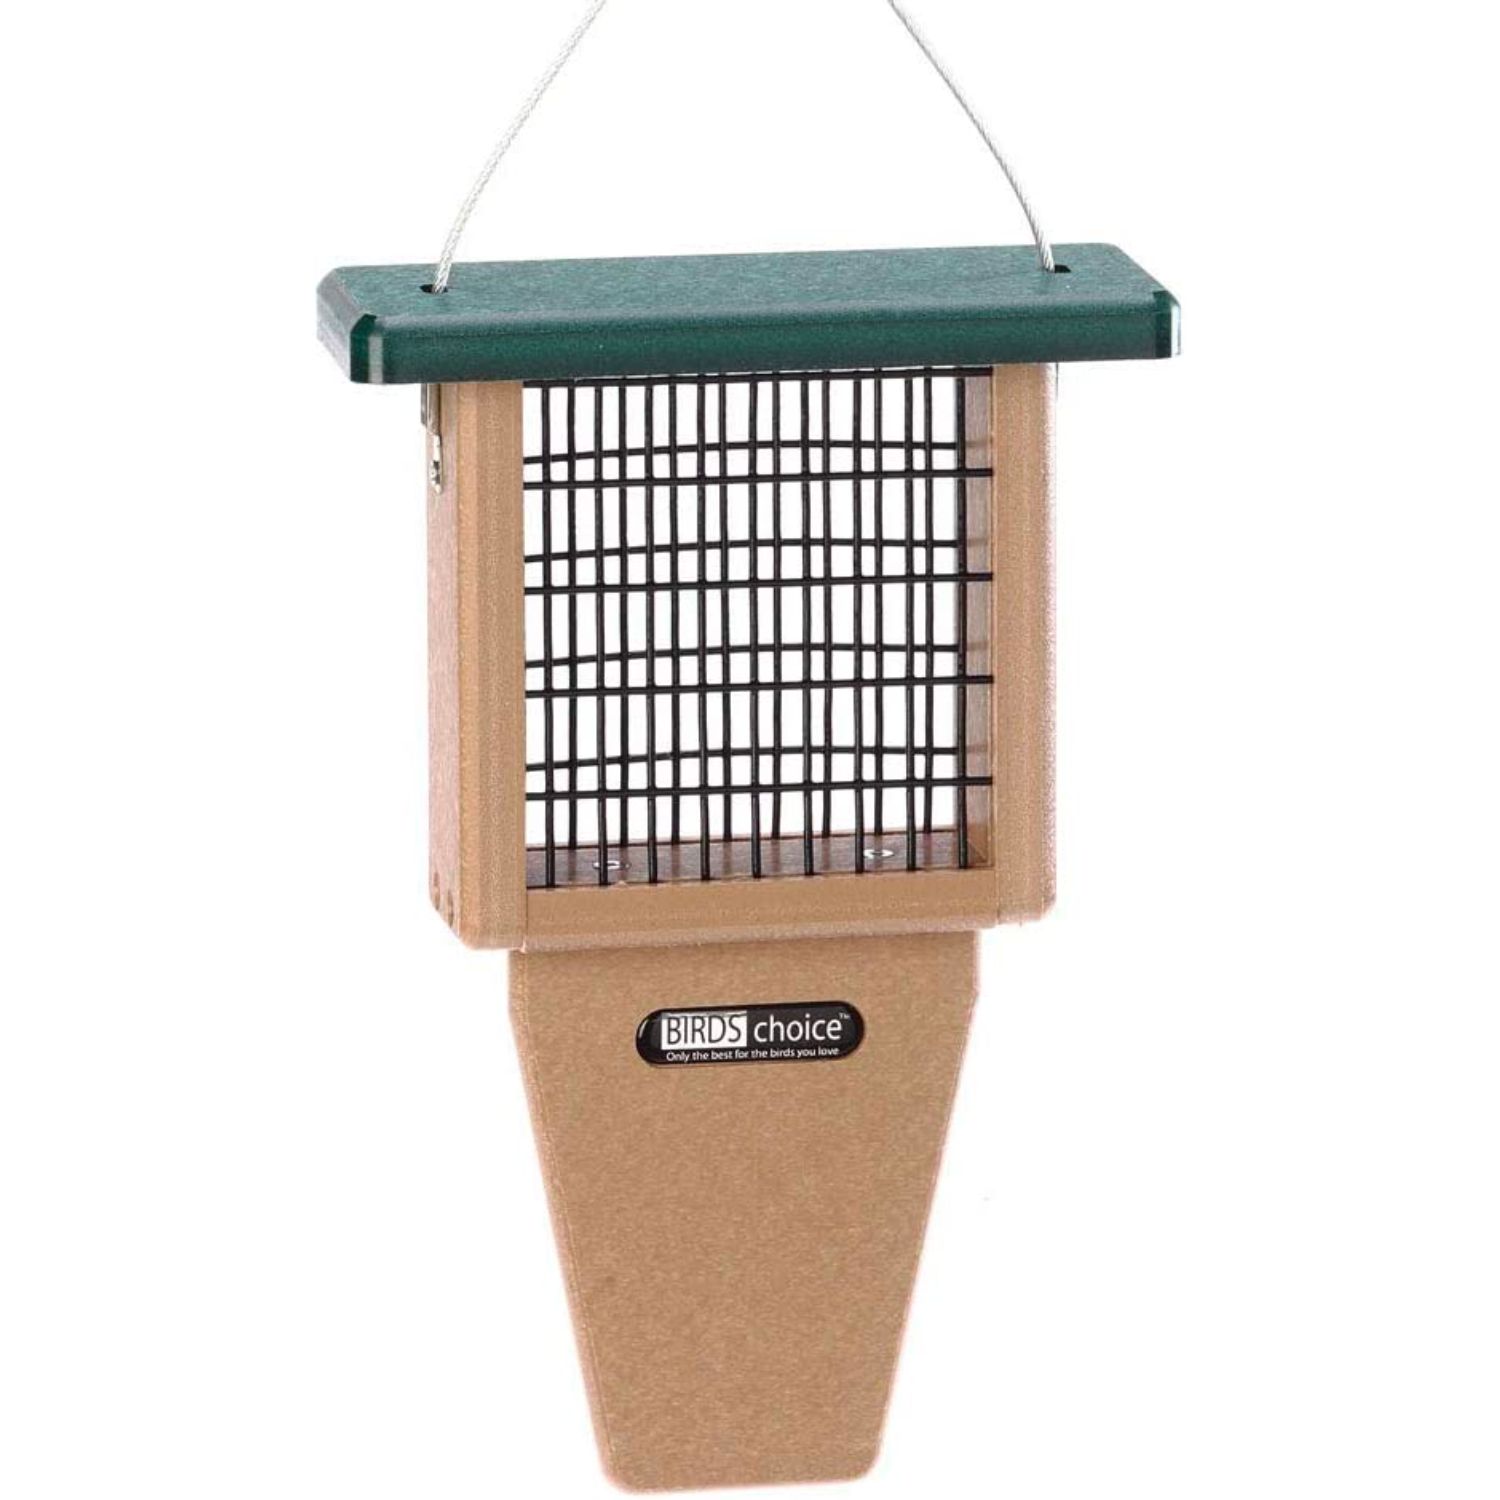 The Best Outdoor Accessories for Bird Lovers Option: Birds Choice SNTP Recycled Single Cake Suet Feeder